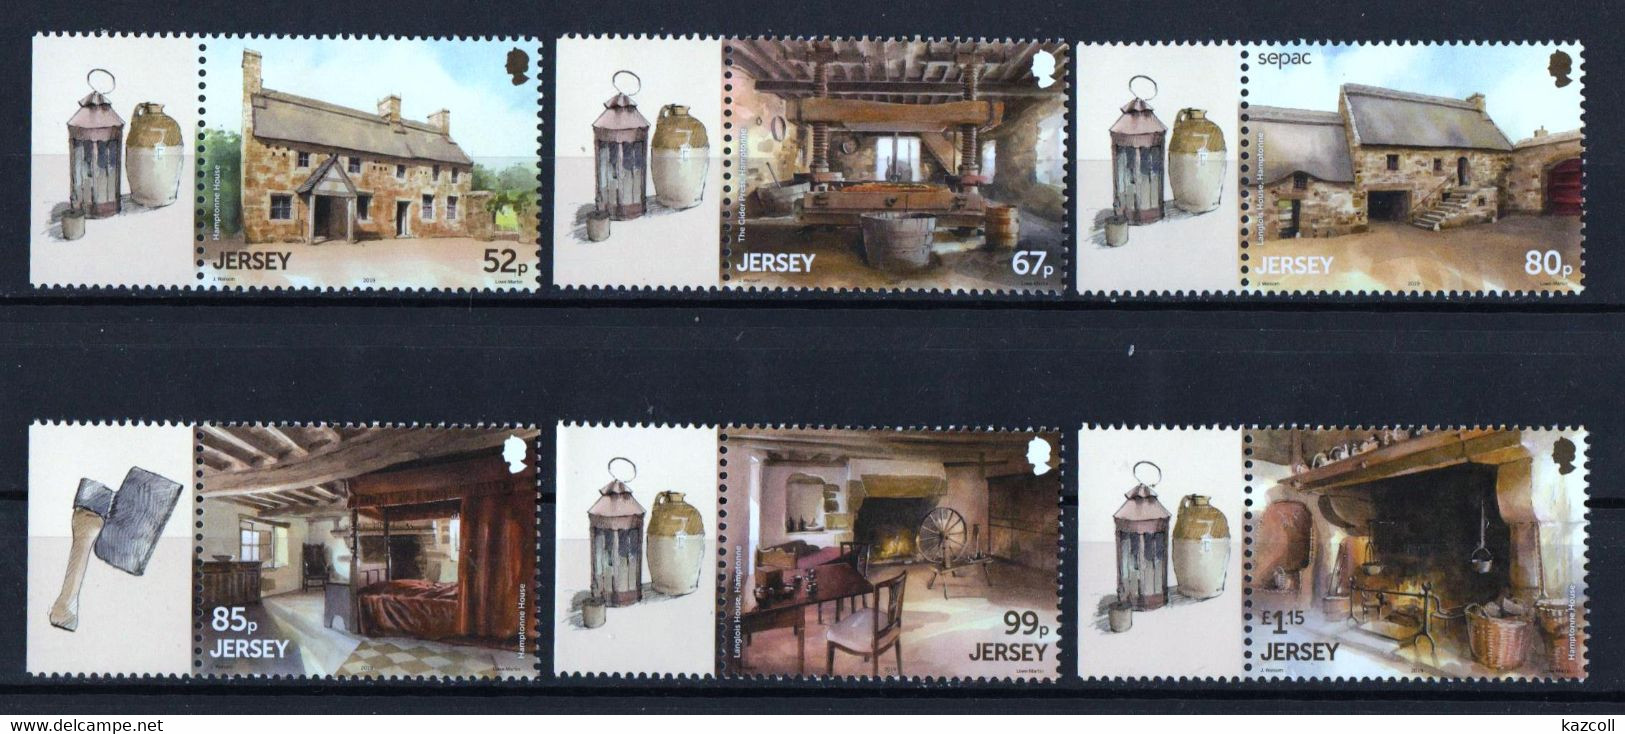 Jersey 2019. SEPAC. Old Residential Houses. Architecture. Hamptonne Country Life Museum. MNH - Jersey